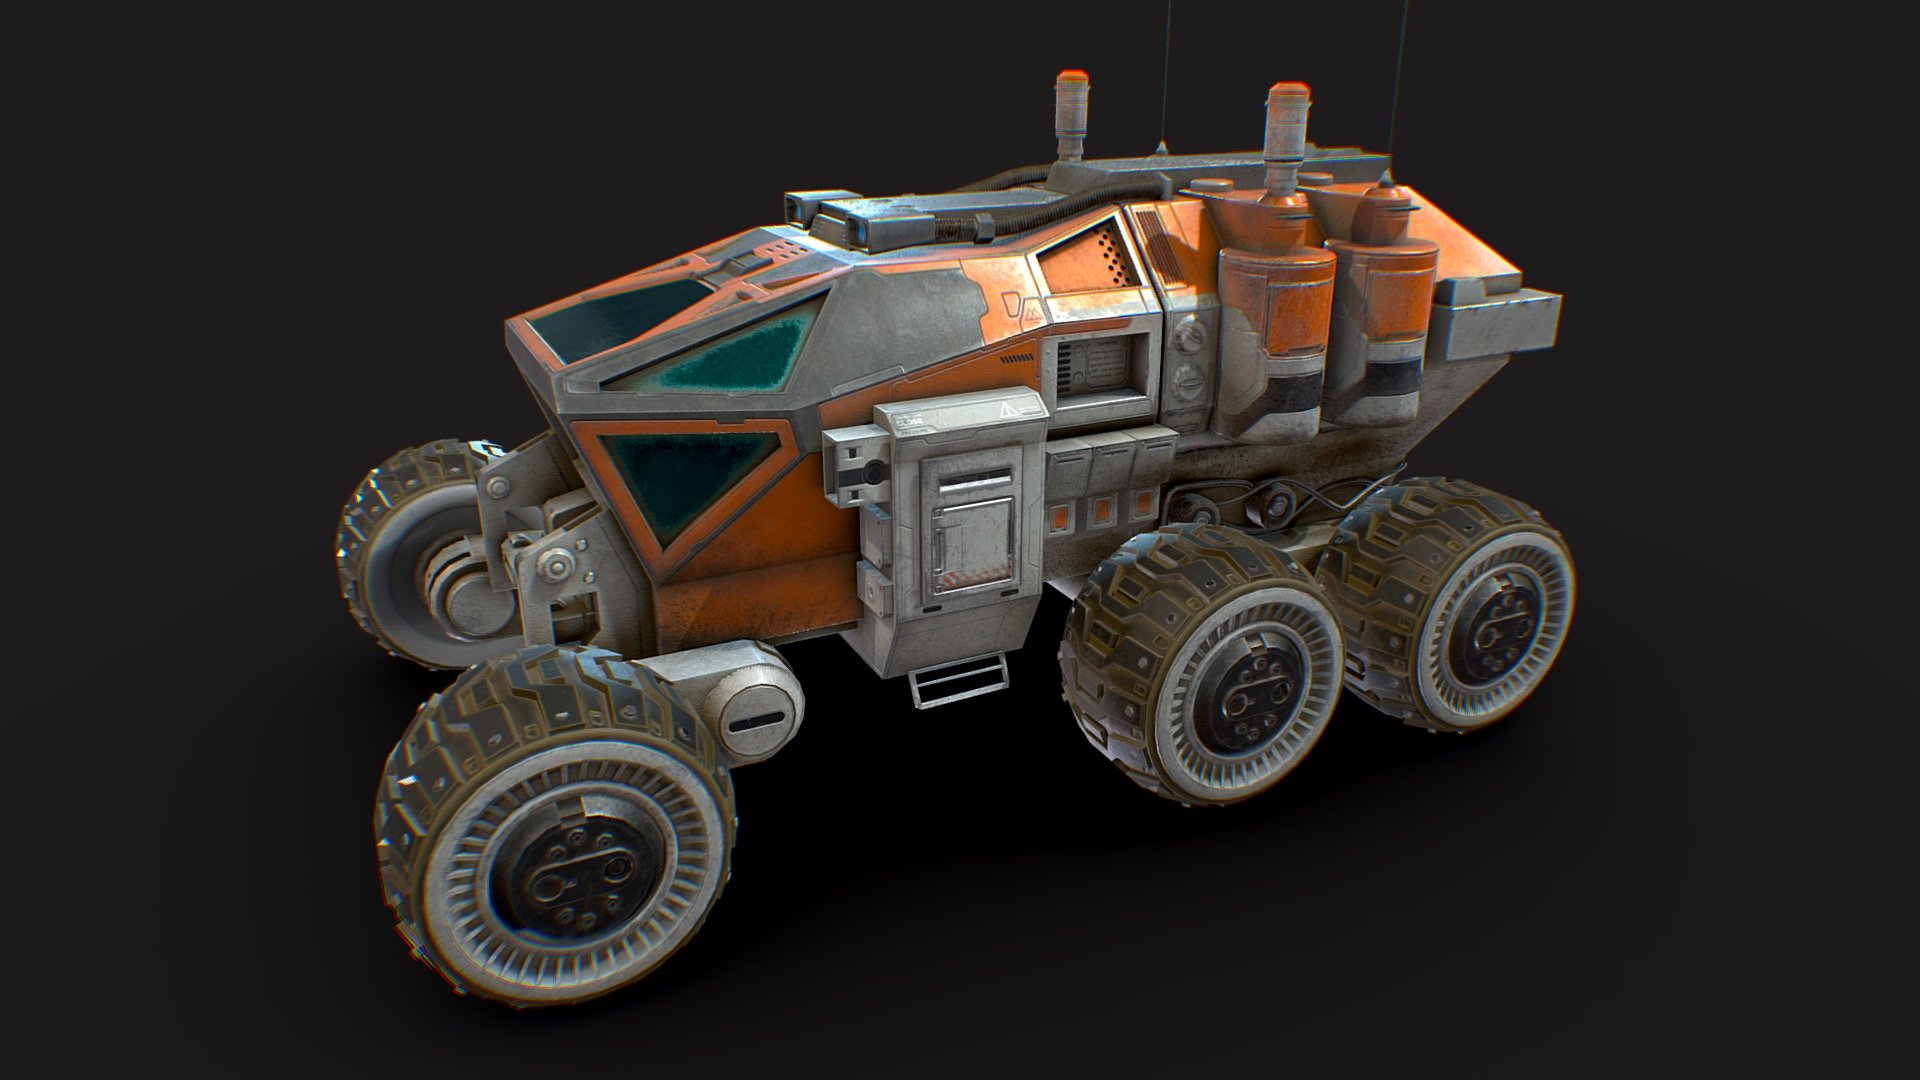 Space Rover Mars, Space, Rover, 3D, Model
machine technology rover mars nasa car vehicle industry astronomy space science saturn spacecraft machinery power robot other
UE4 and UE5 Project DESCRIPTION
This model is provided as obj, fbx and SPP format.
Different versions of 3ds max scenes are provided.
SubstancePainter - file provided. (EXPORT FOR ANY ENGINE!)
Unity Asset (.unitypackage) Provided!
.tbscene, .glb, .mview Files Provided!
When creating a UNWRAP for this 3D model, the V-RayUDIM technology was used.
Provides full textures for the Mars Rover, as well as an HDRI-map. Textures in the resolution of 4096x4096. Enjoy using! smiley
Full U4 Project .uproject Provided - Mars Rover Unreal Engine Rigged UE4 and UE5 - Buy Royalty Free 3D model by sergey.koznov 3d model